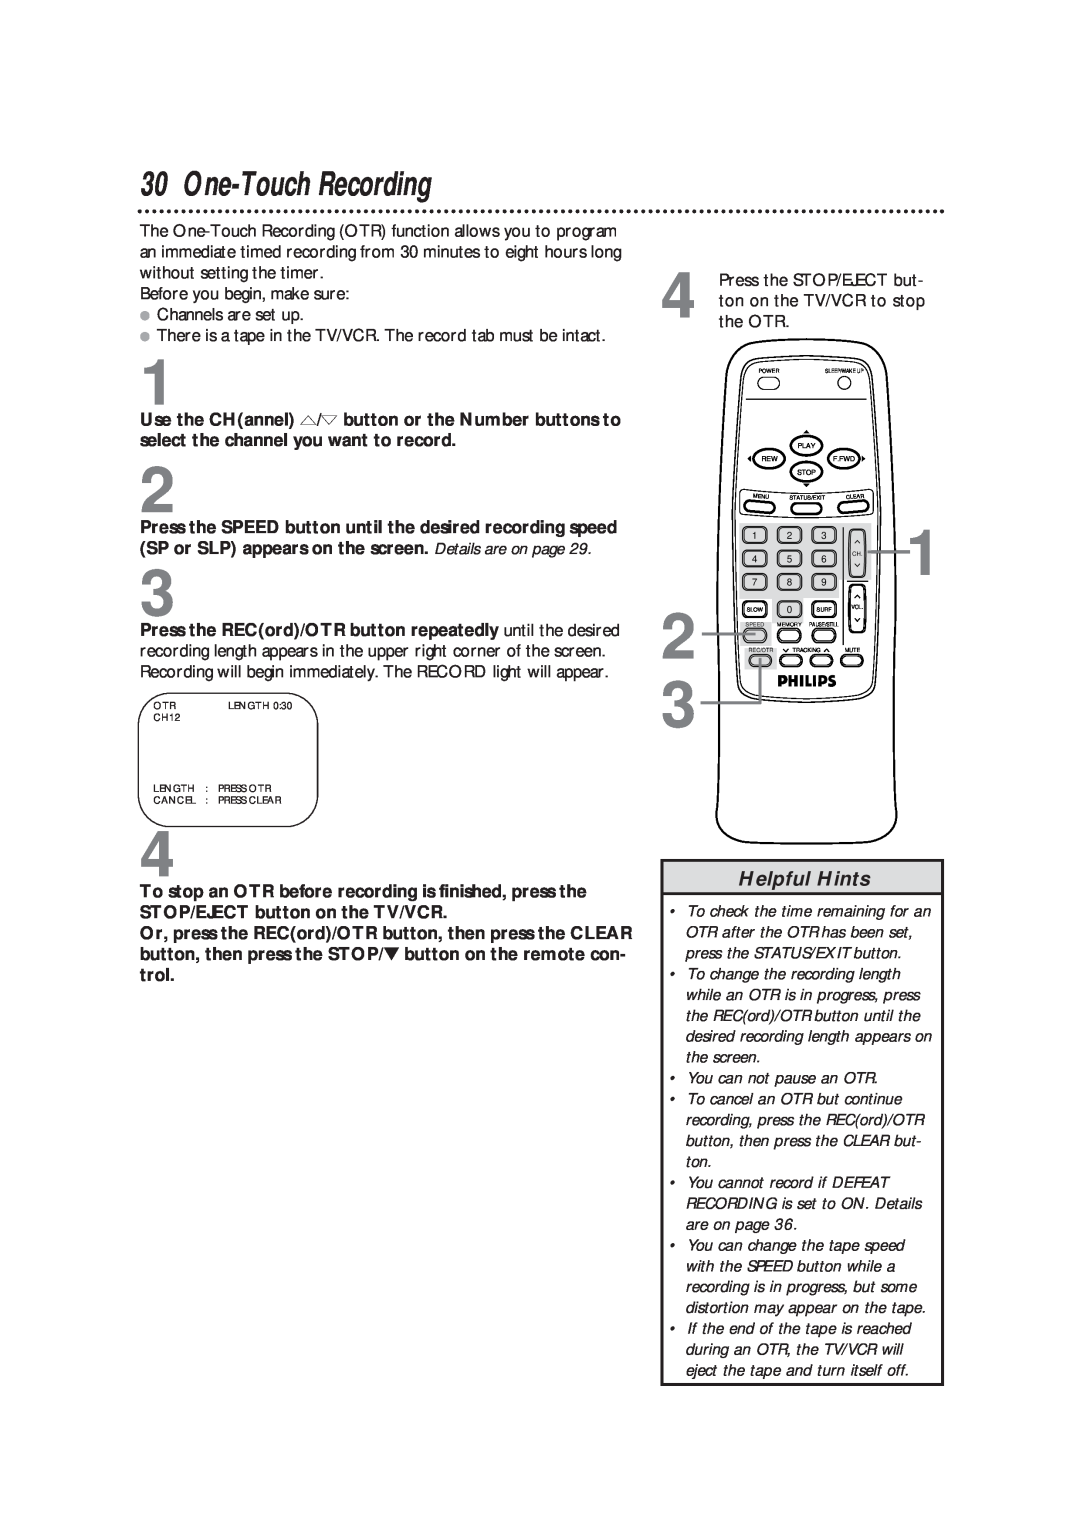 Magnavox CCB193AT owner manual One-Touch Recording, Helpful Hints, Before you begin, make sure Channels are set up, the OTR 